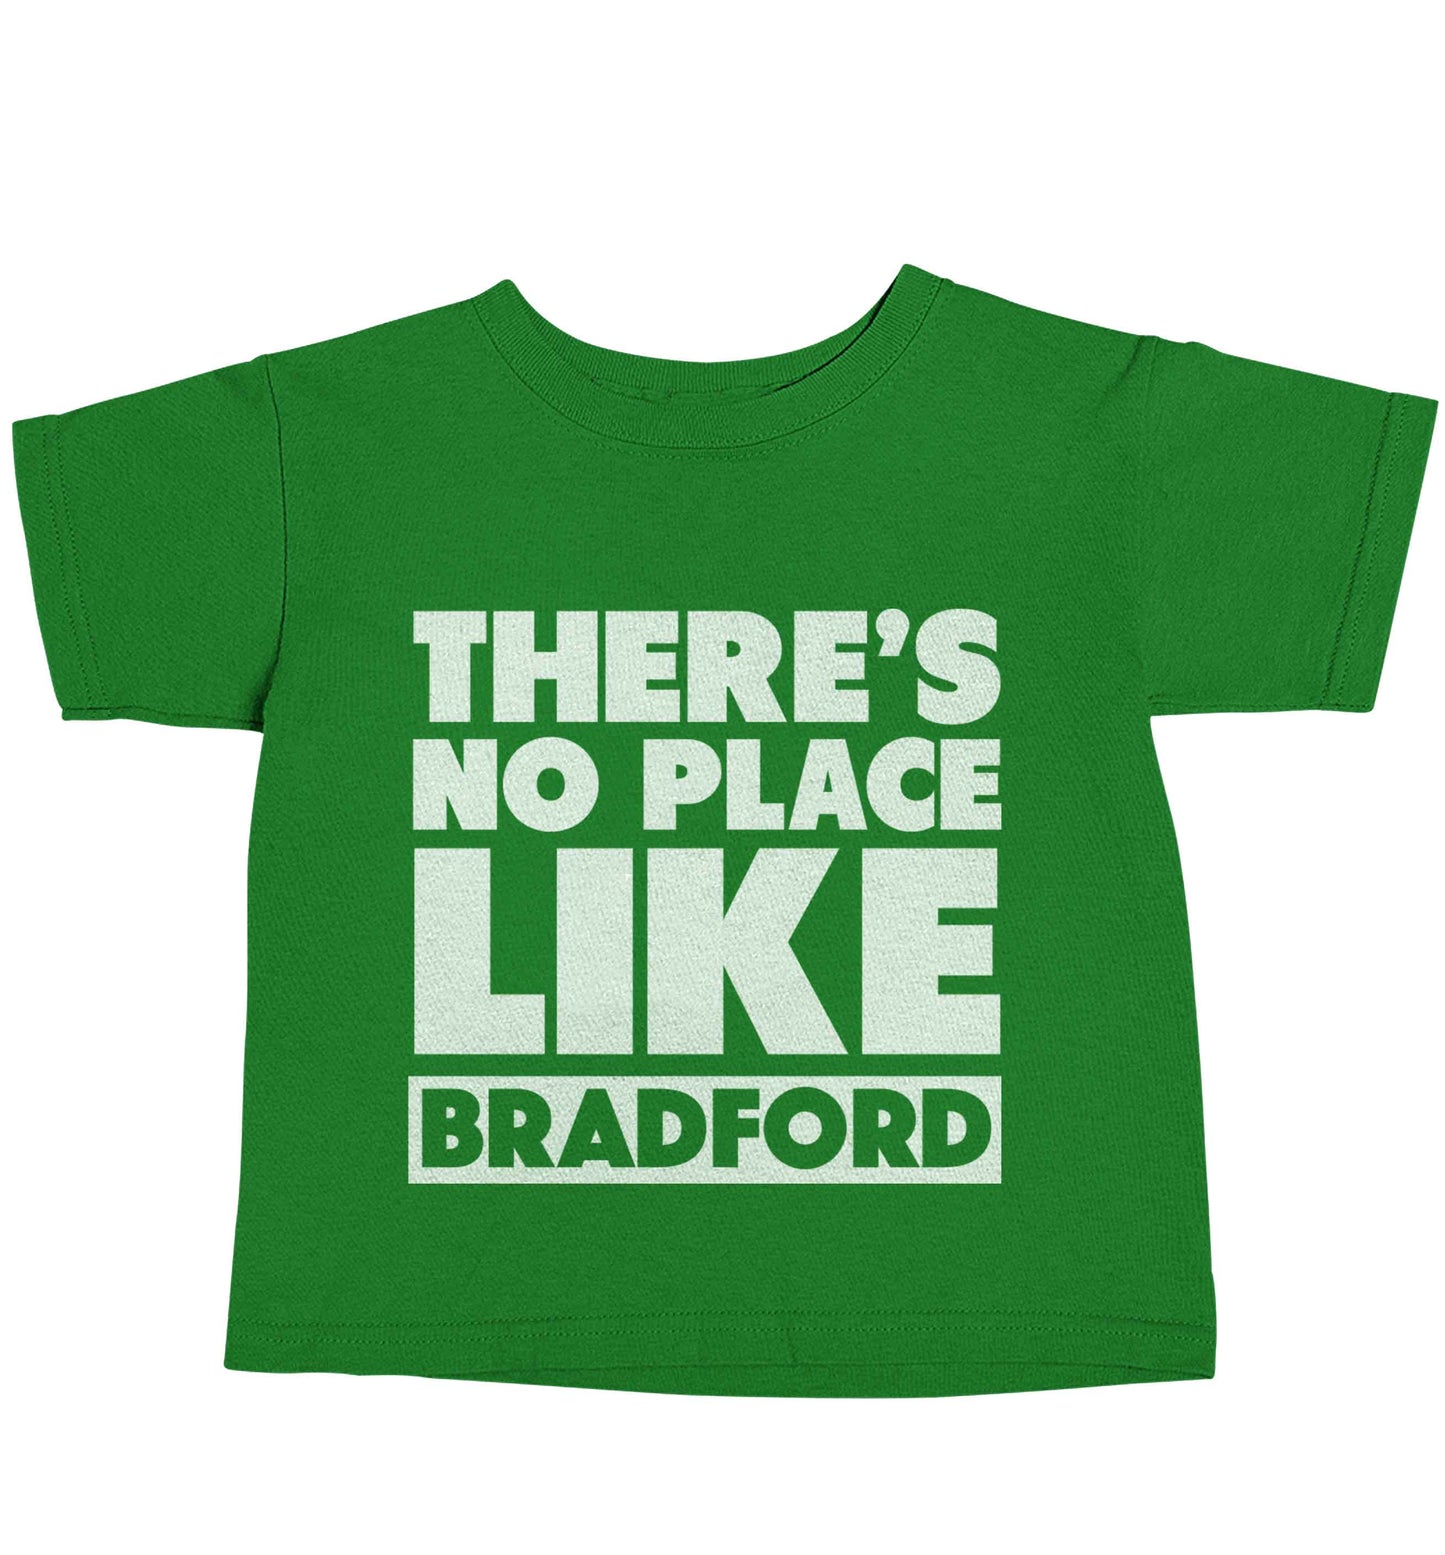 There's no place like Bradford green baby toddler Tshirt 2 Years